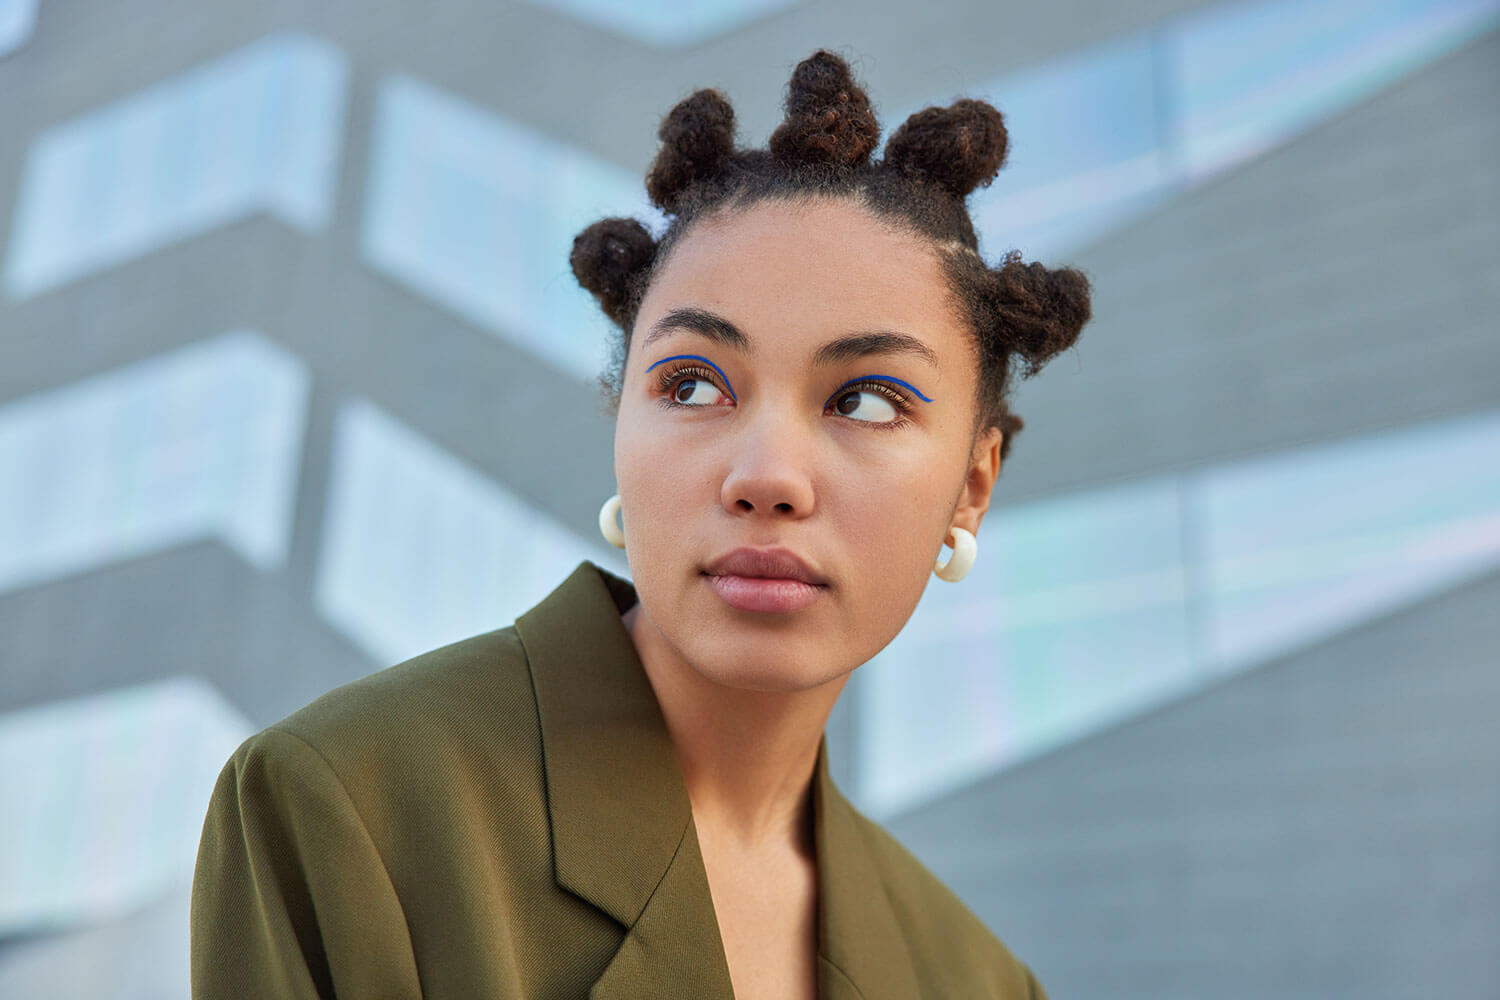 Stylish woman with hair buns poses against blurred background